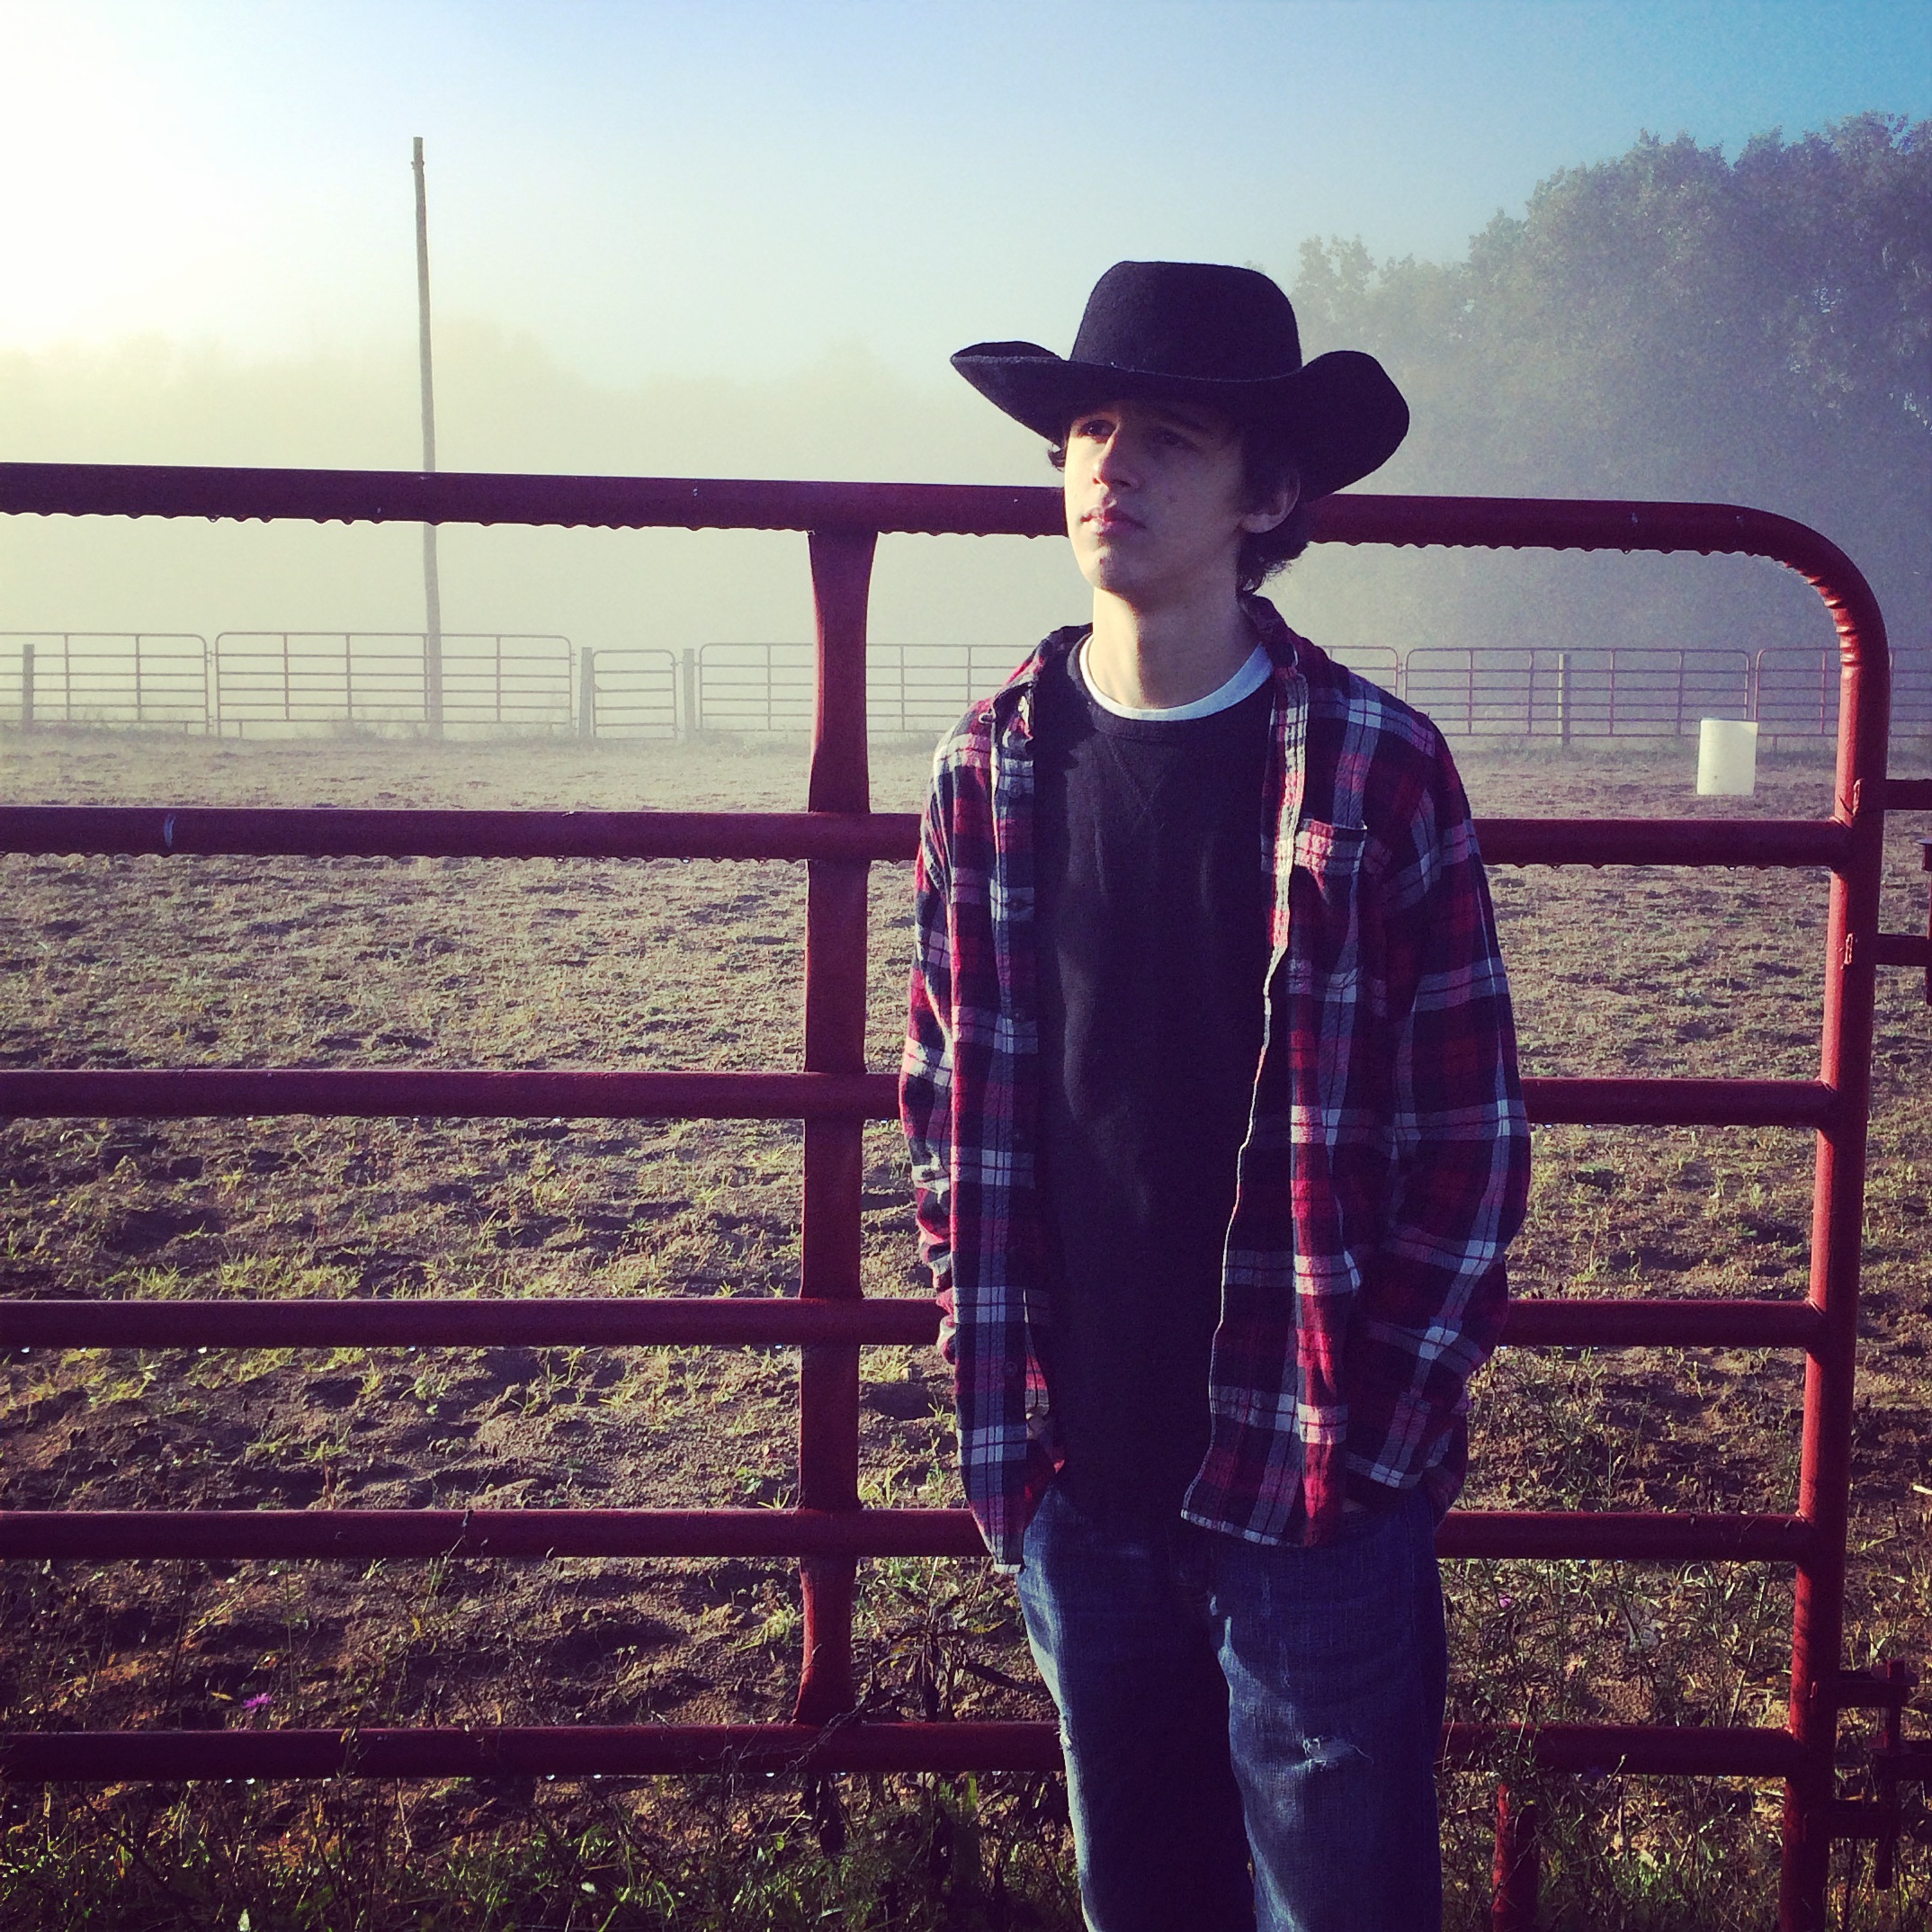 A shot of Jacob T. Ouellette, from the wonderful film, Rodeo Girl.